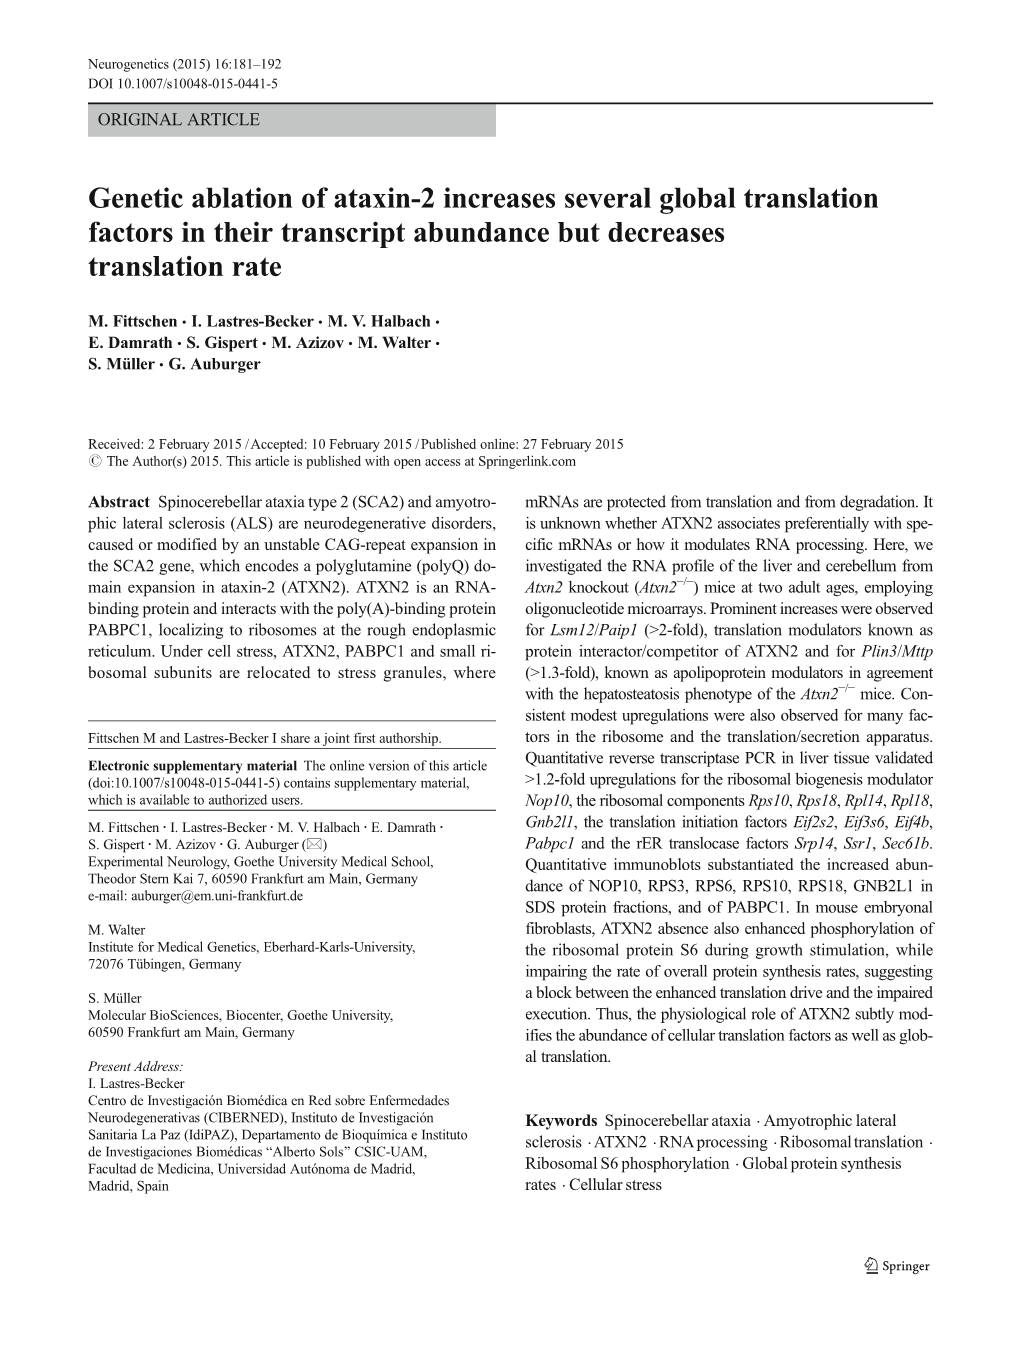 Genetic Ablation of Ataxin-2 Increases Several Global Translation Factors in Their Transcript Abundance but Decreases Translation Rate